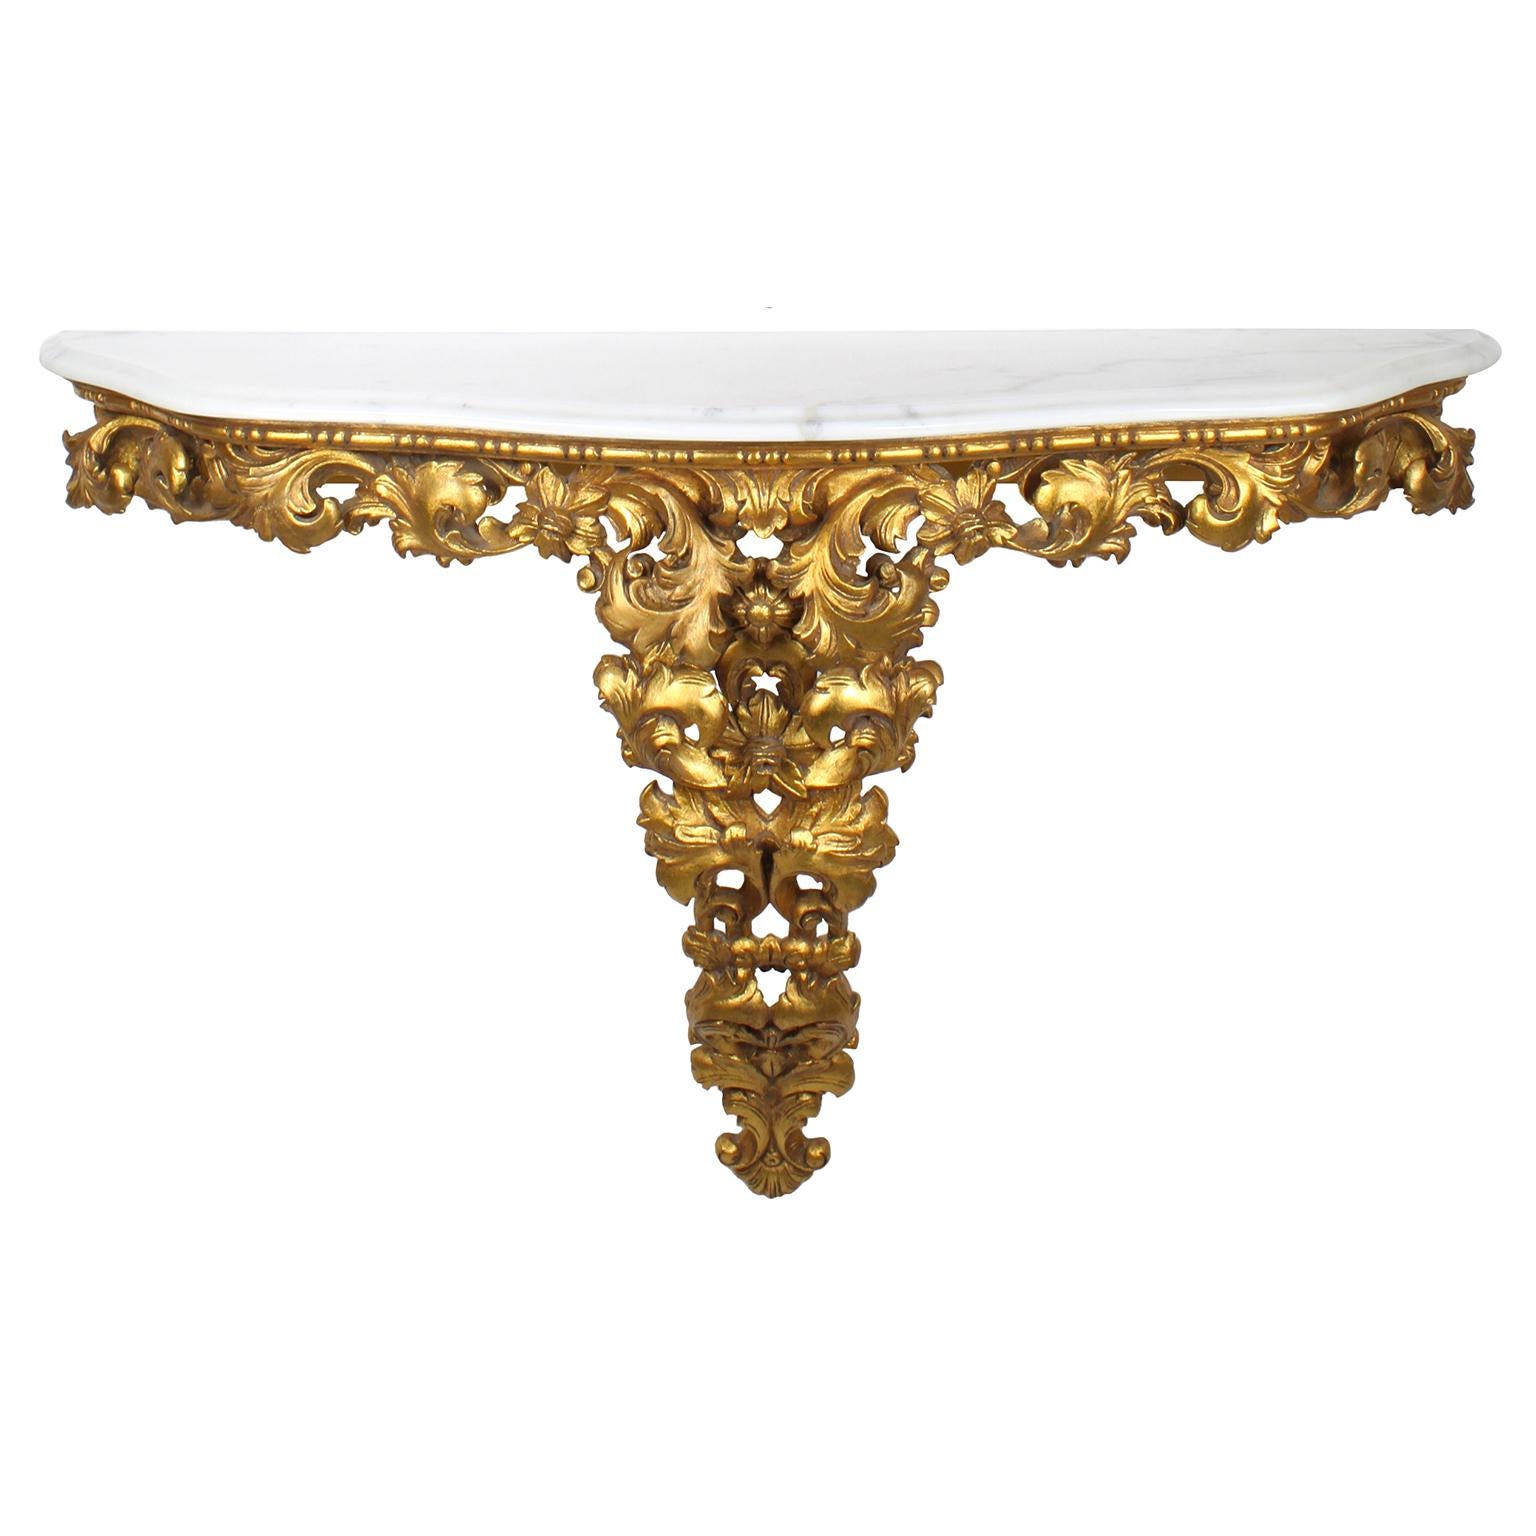 Rococo Revival Italian Florentine Gilt Wood Carved Oval Mirror & Marble Top Console Set For Sale